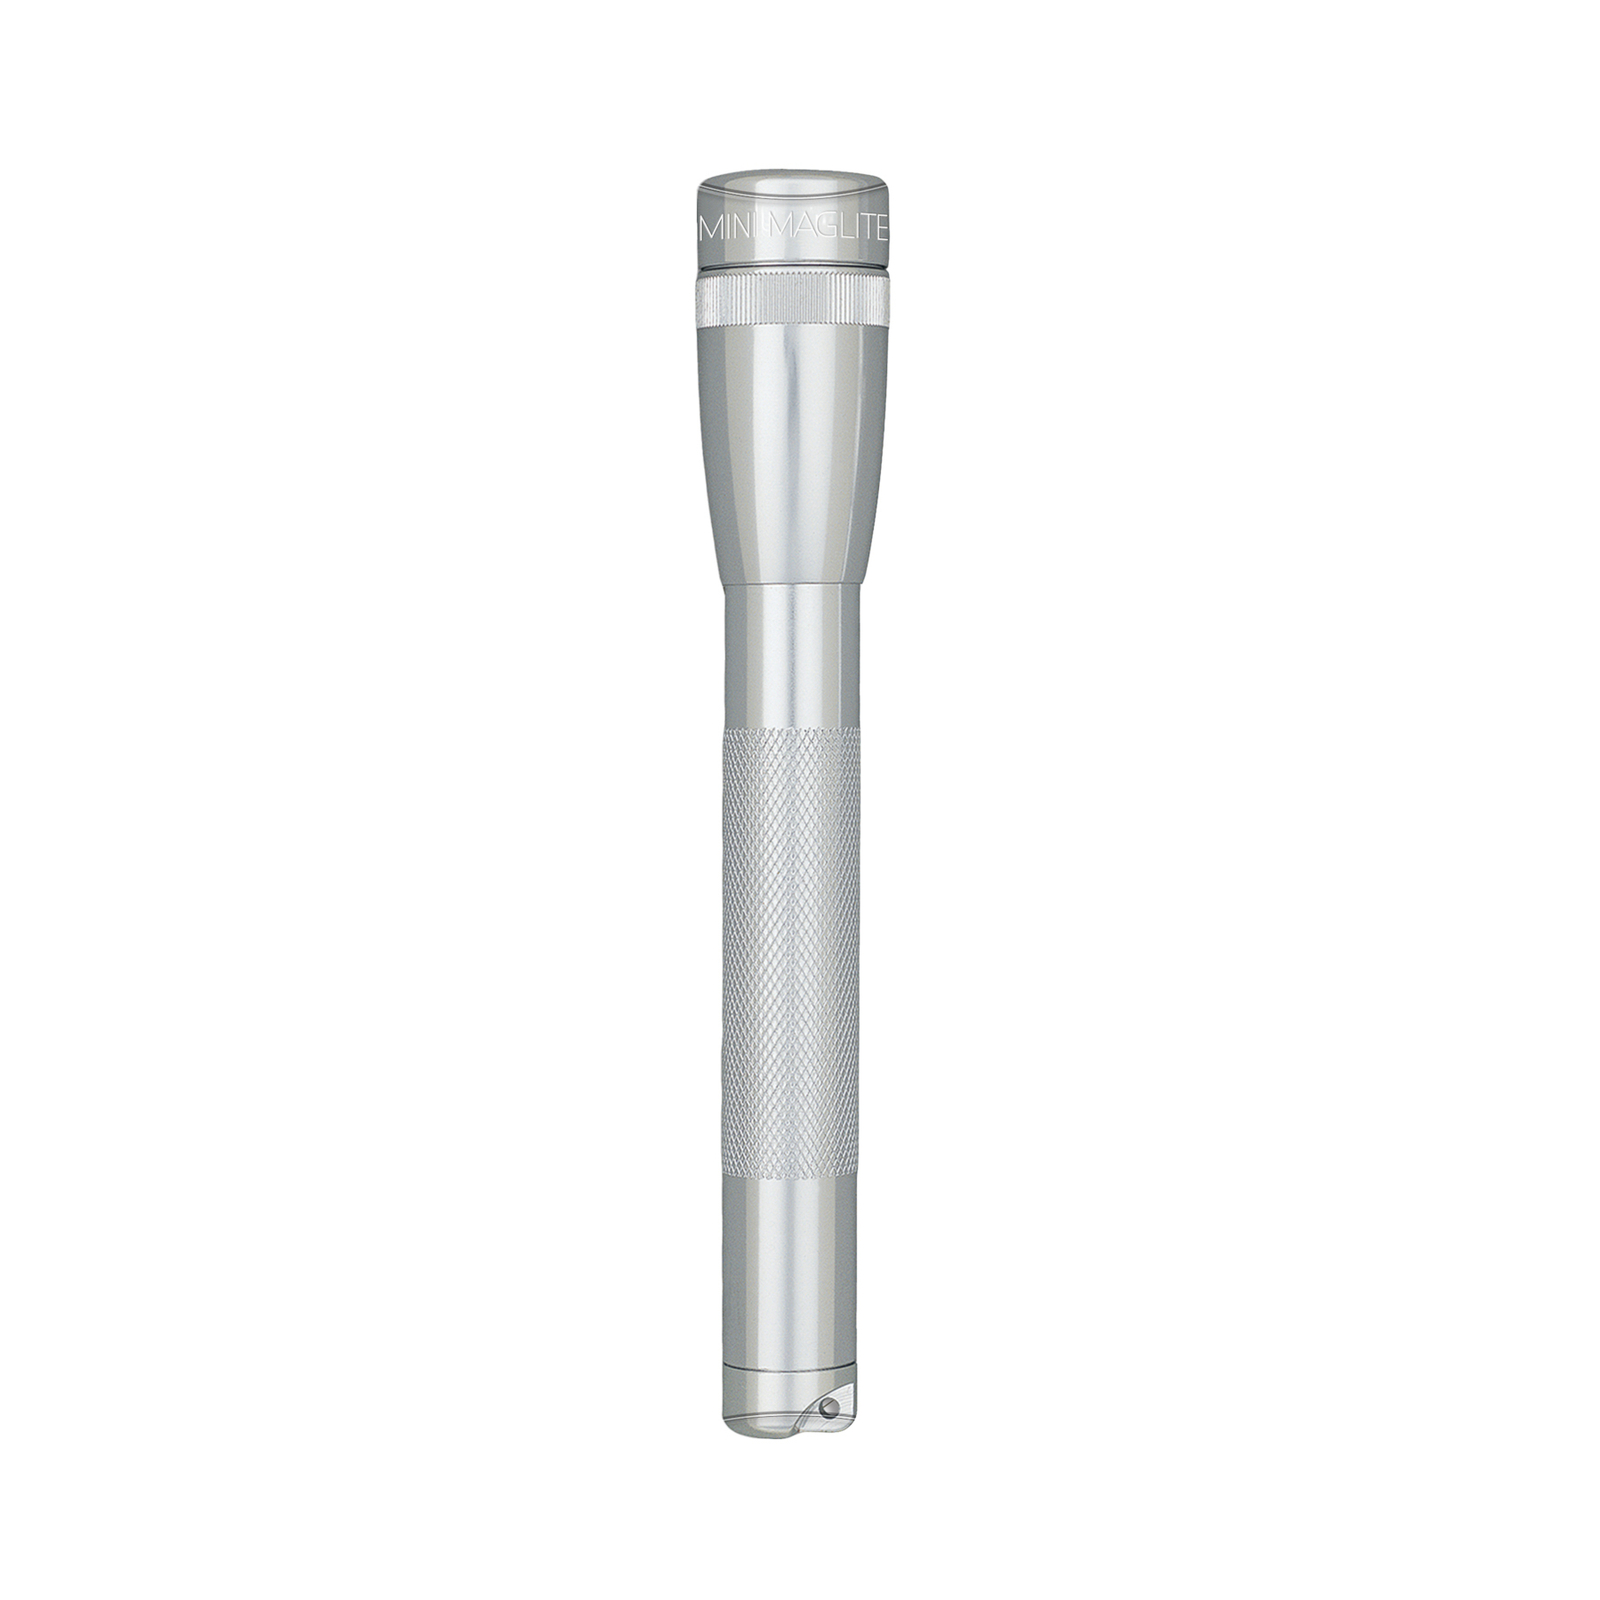 Maglite LED-ficklampa Mini, 2-cell AA, hölster, silver